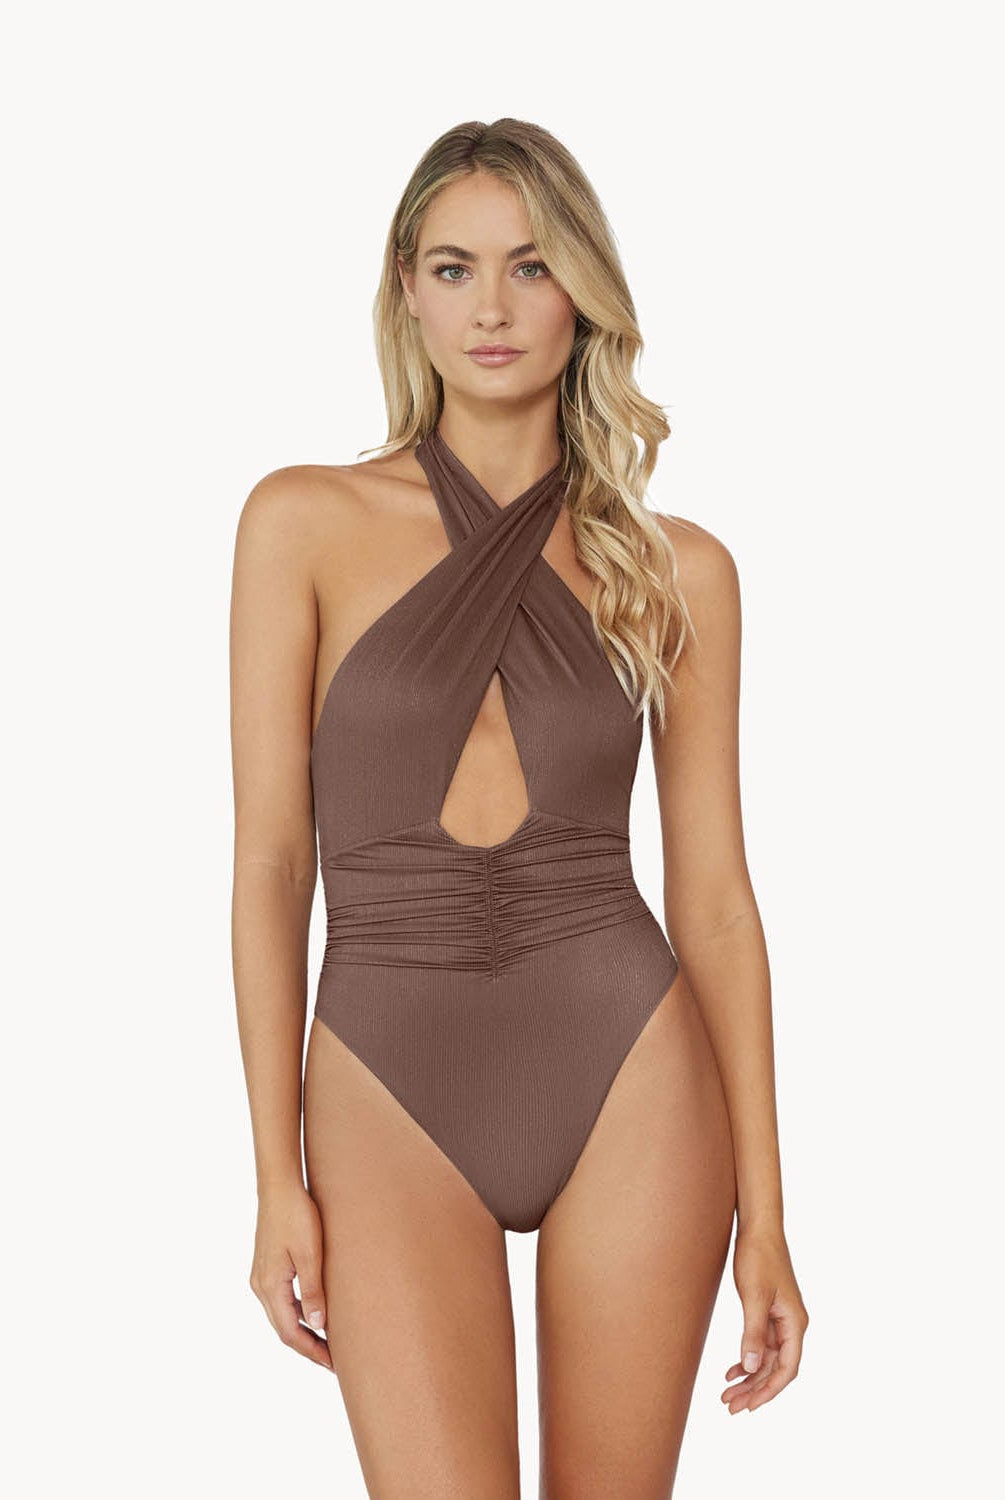 A blonde woman wearing a brown one piece bathing suit stands in front of a white wall. 